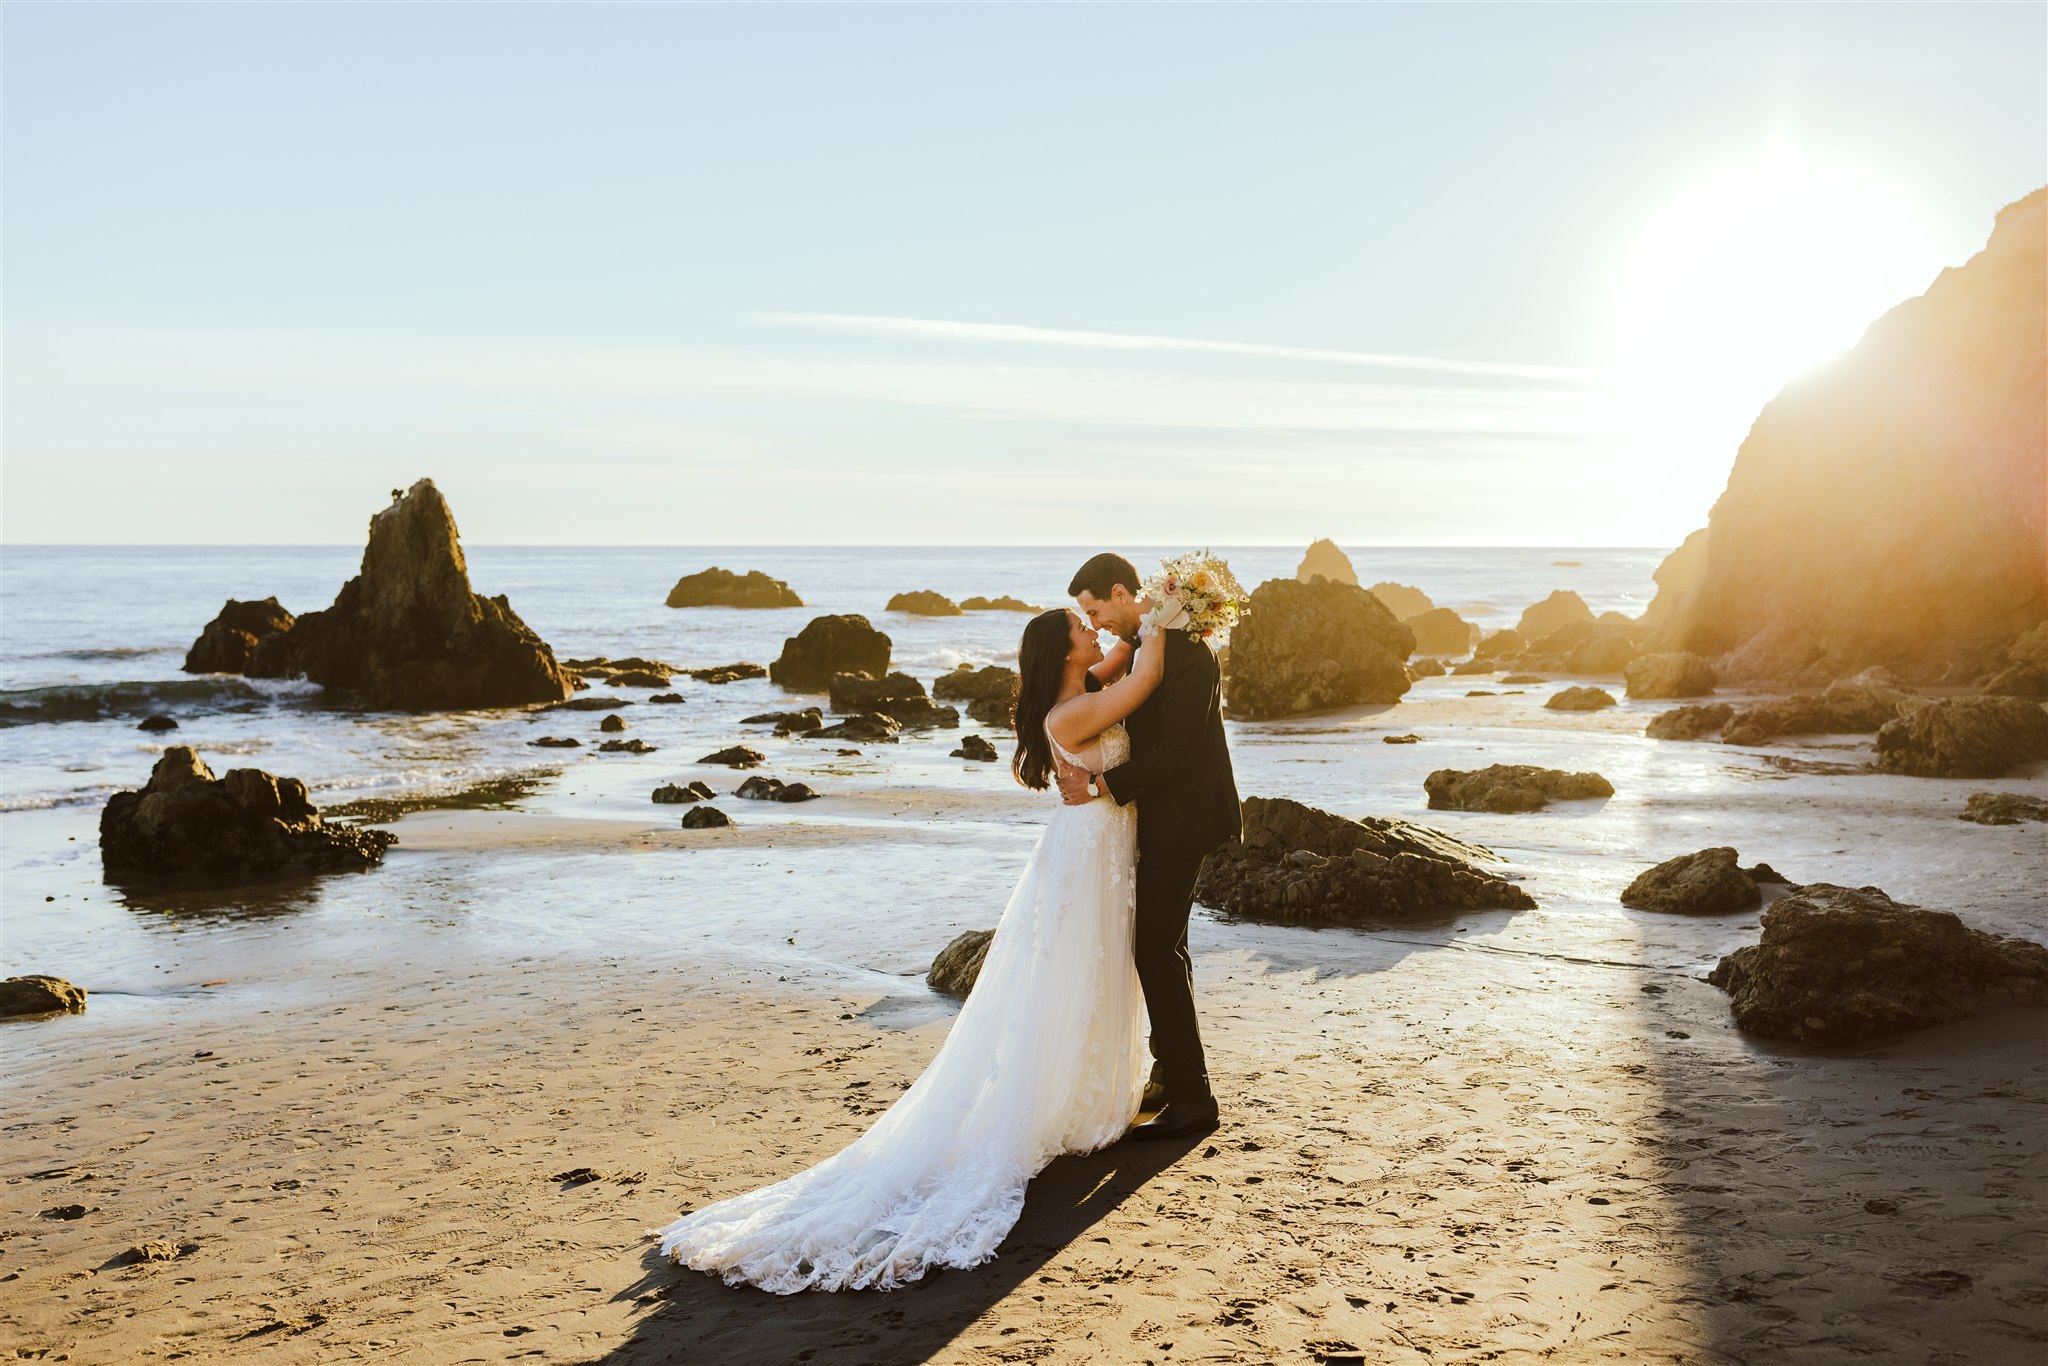 Love in Full Bloom: Adventure Wedding Packages Designed for Romance